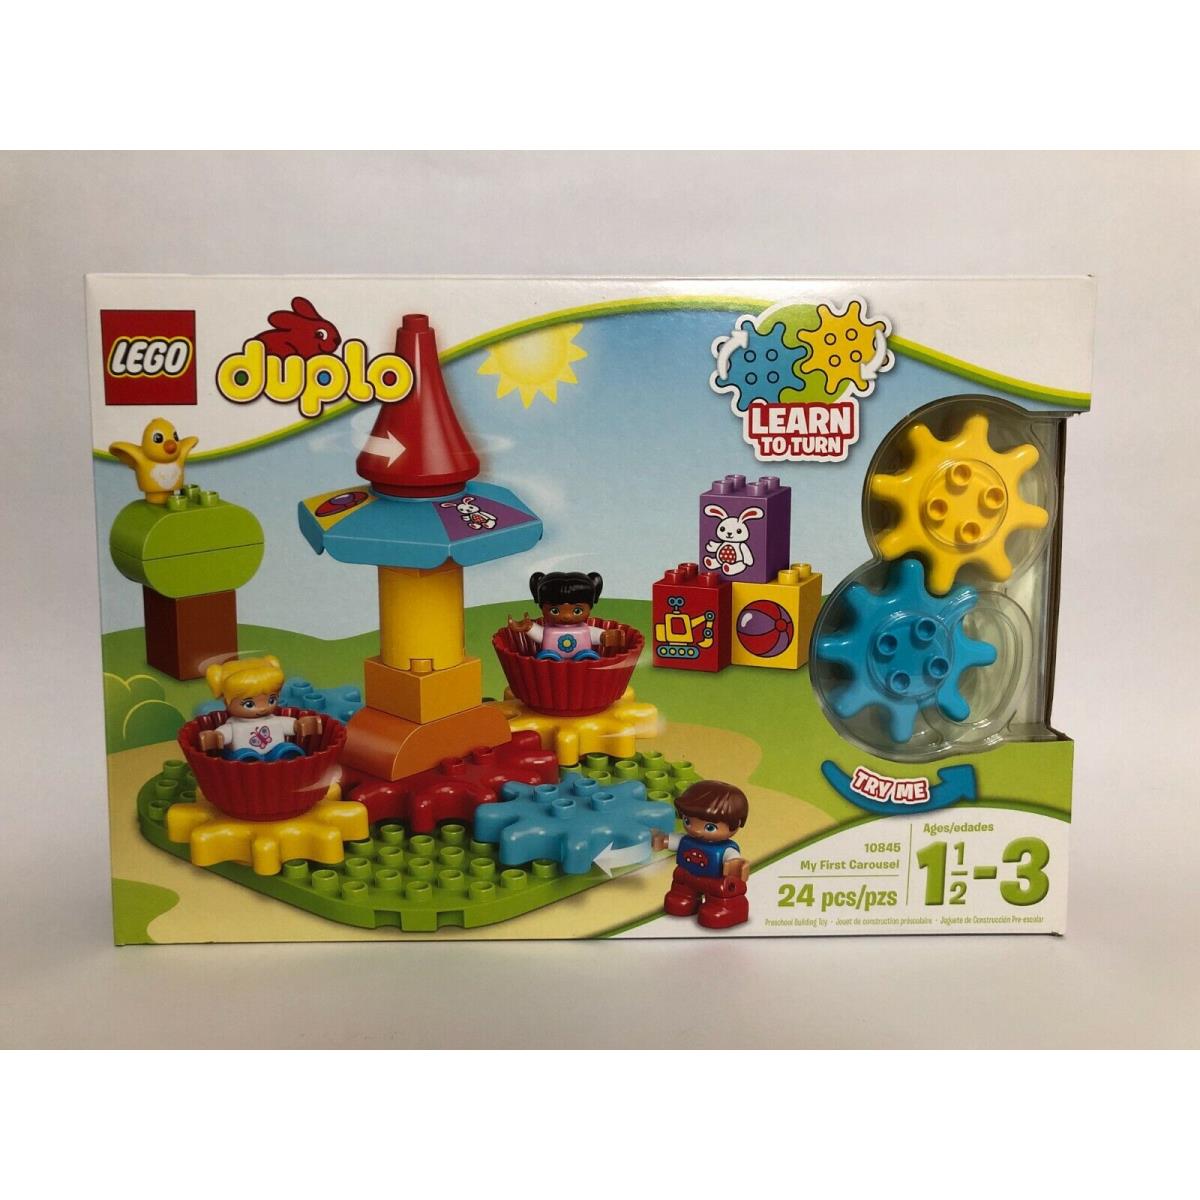 Lego Duplo 10845 My First Carousel - - - Retired